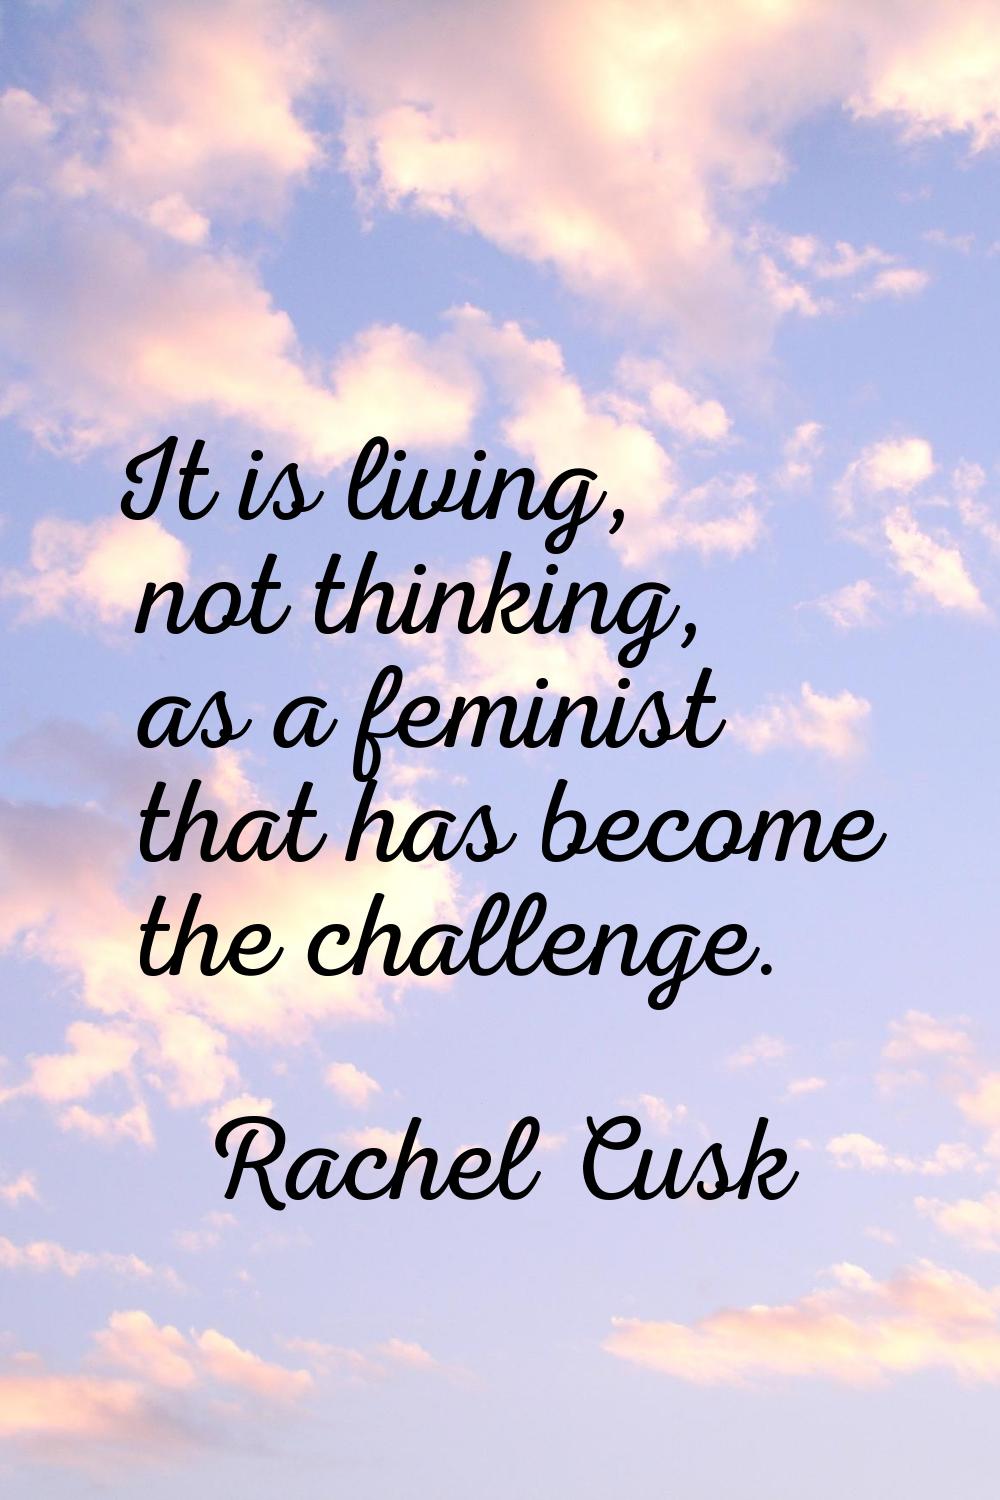 It is living, not thinking, as a feminist that has become the challenge.